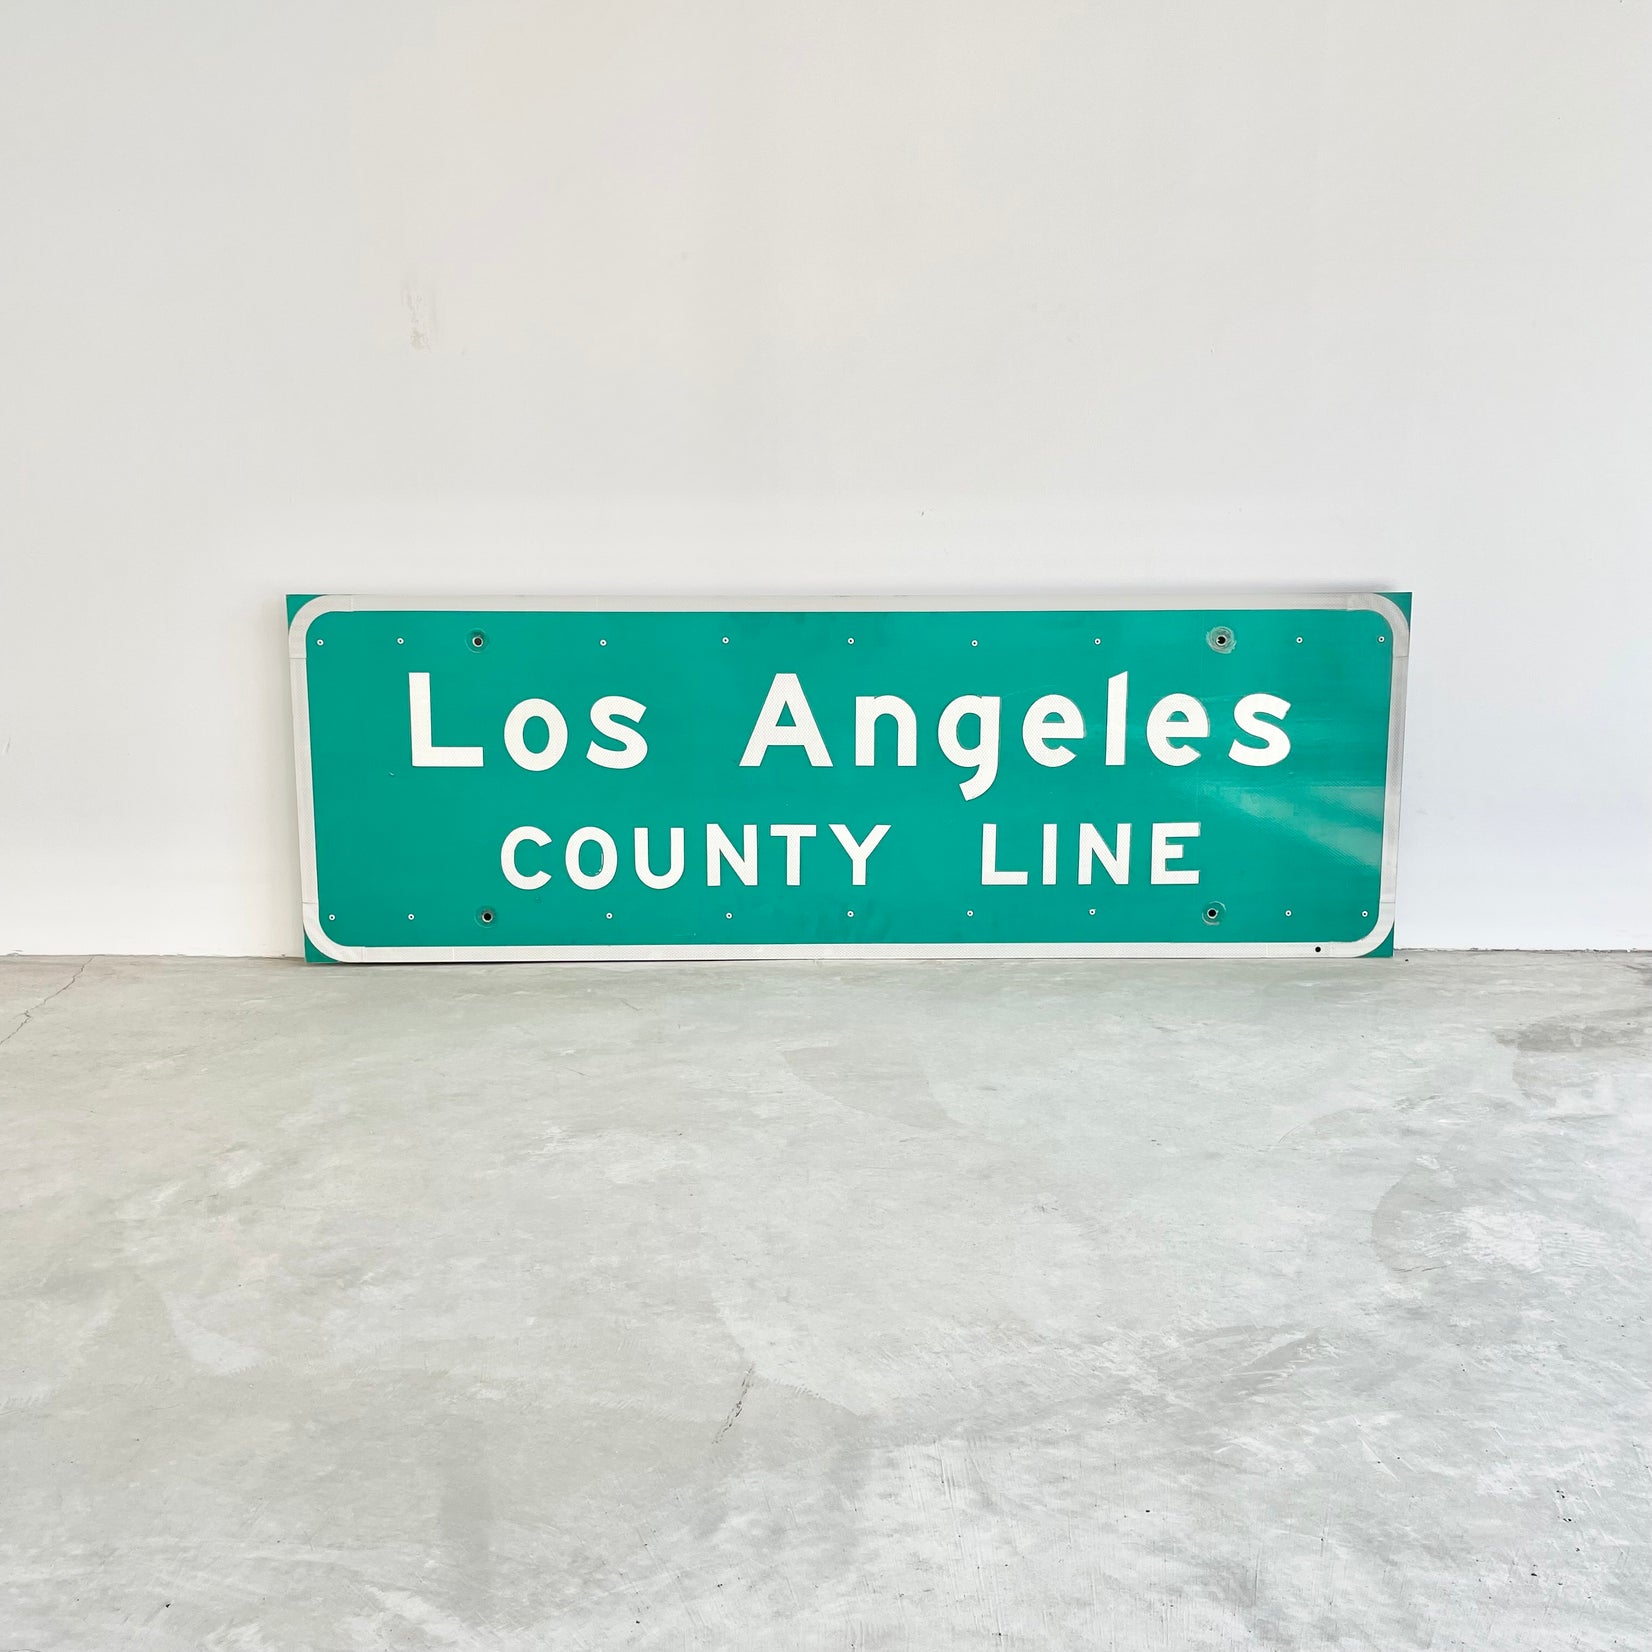 Los Angeles County Line Freeway Sign, 1990s USA